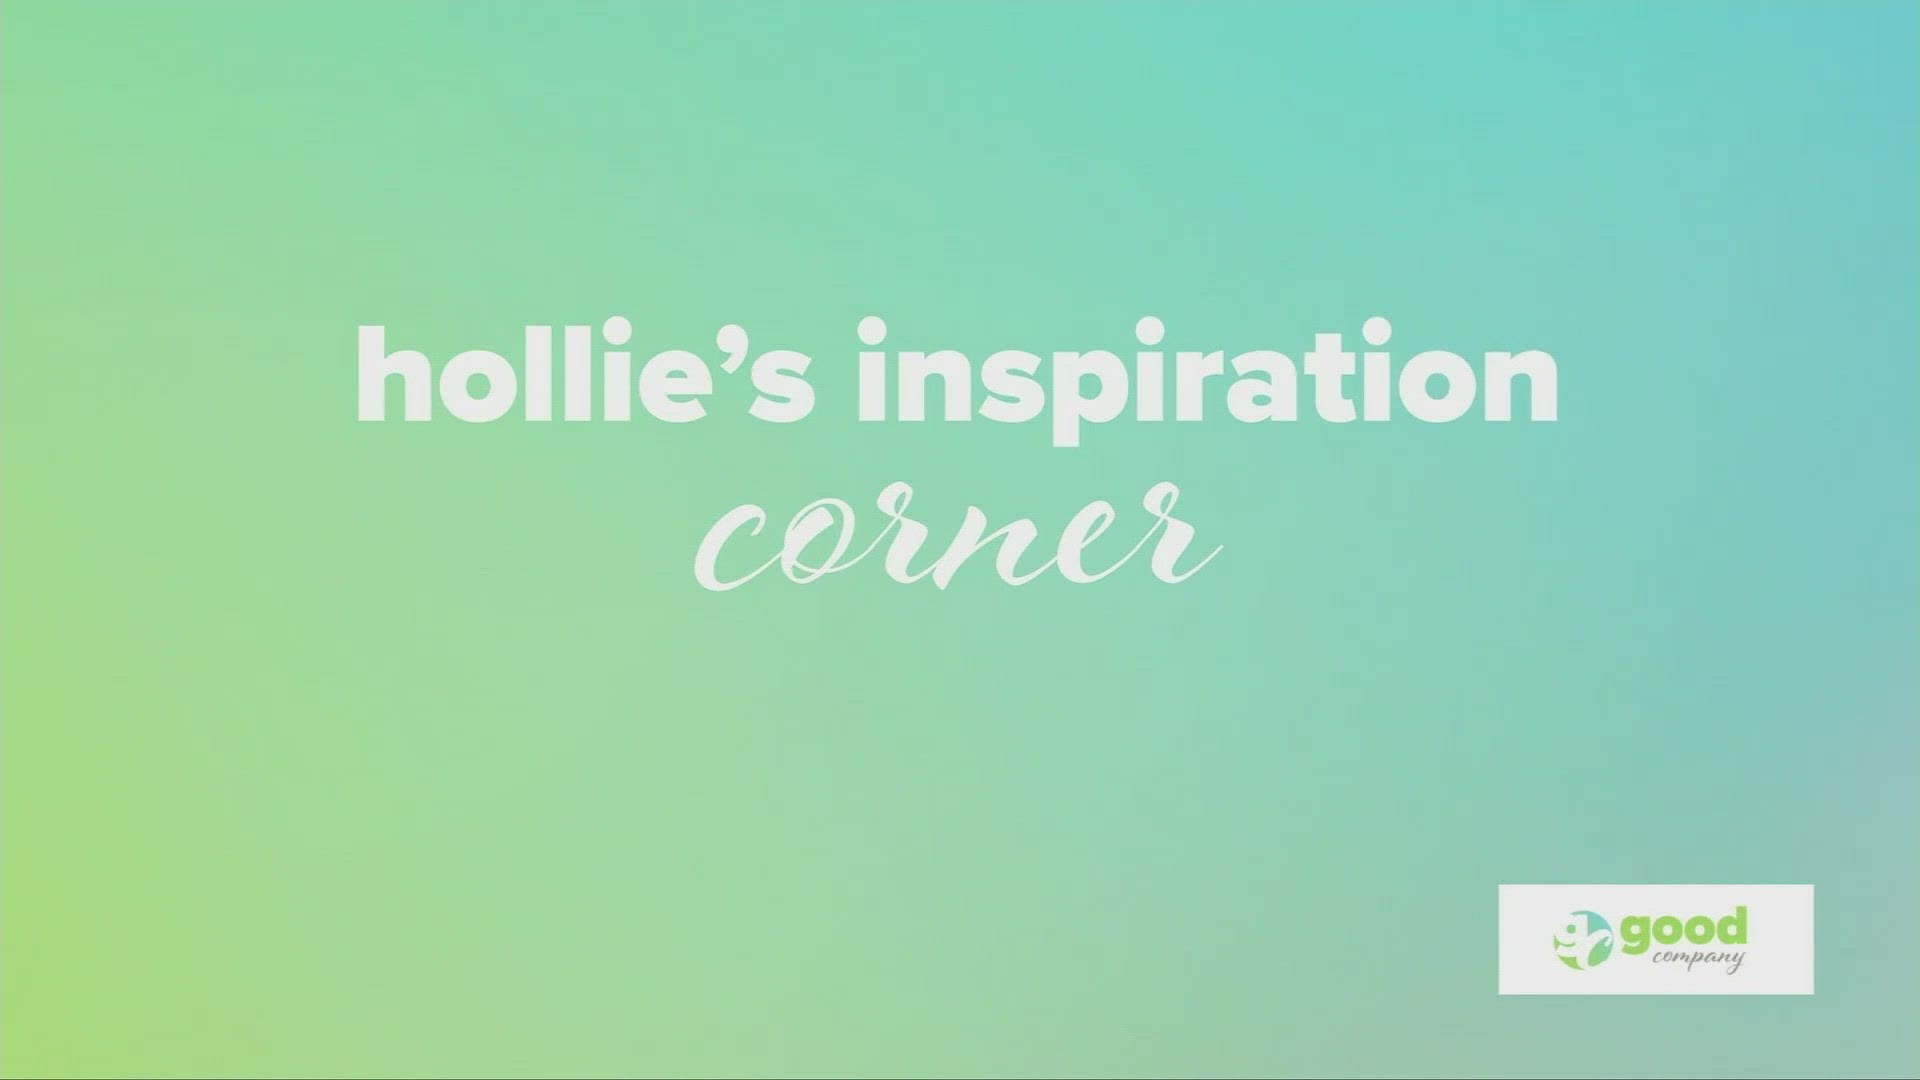 Hollie gives us some inspiration about making it through the sad and rainy days to the next sunny day.